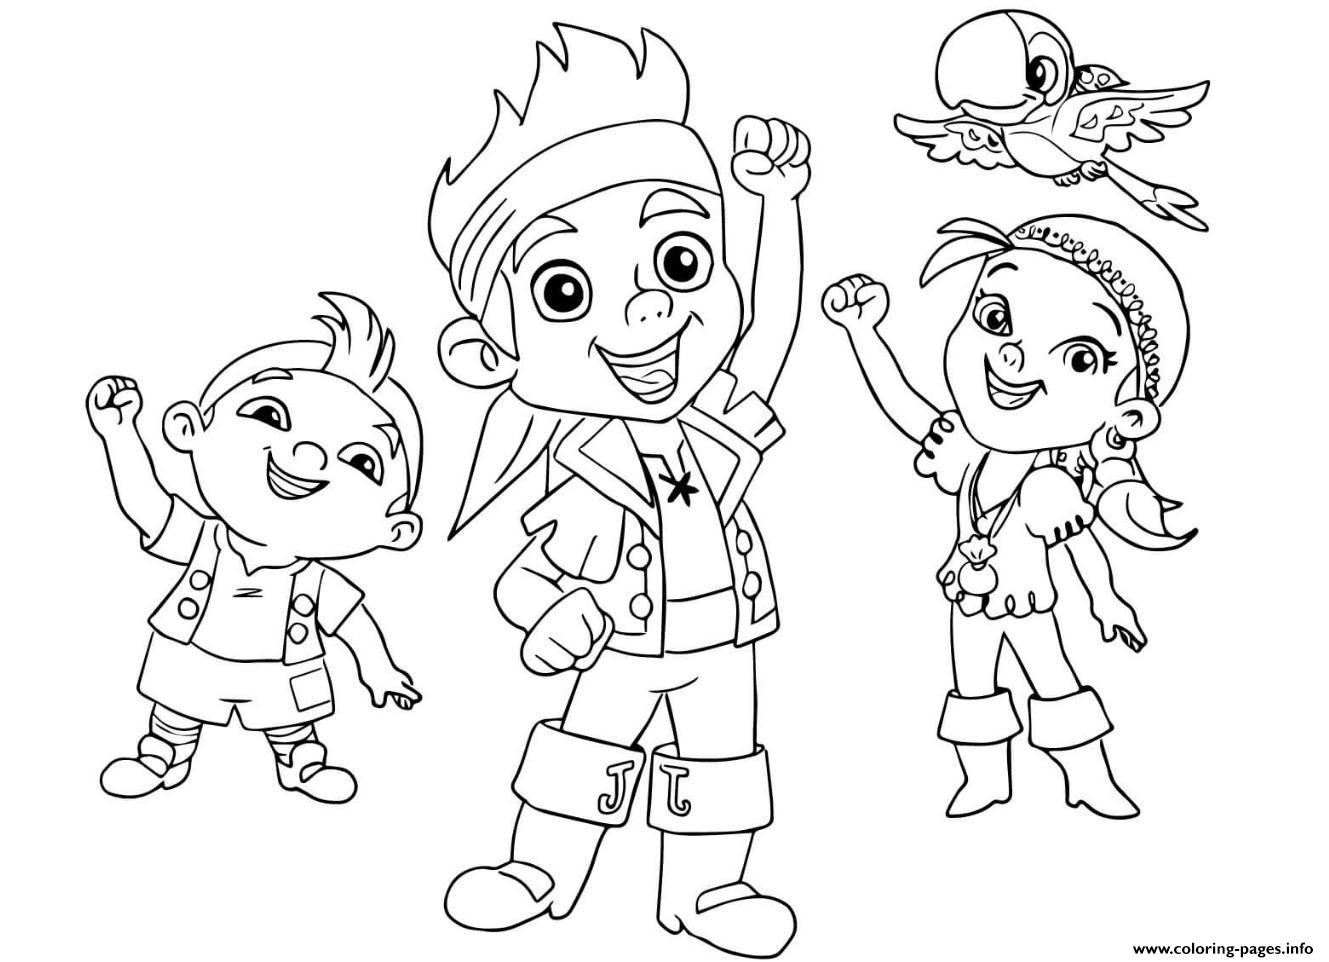 Jake And The Neverland Pirates Team Halloween Coloring